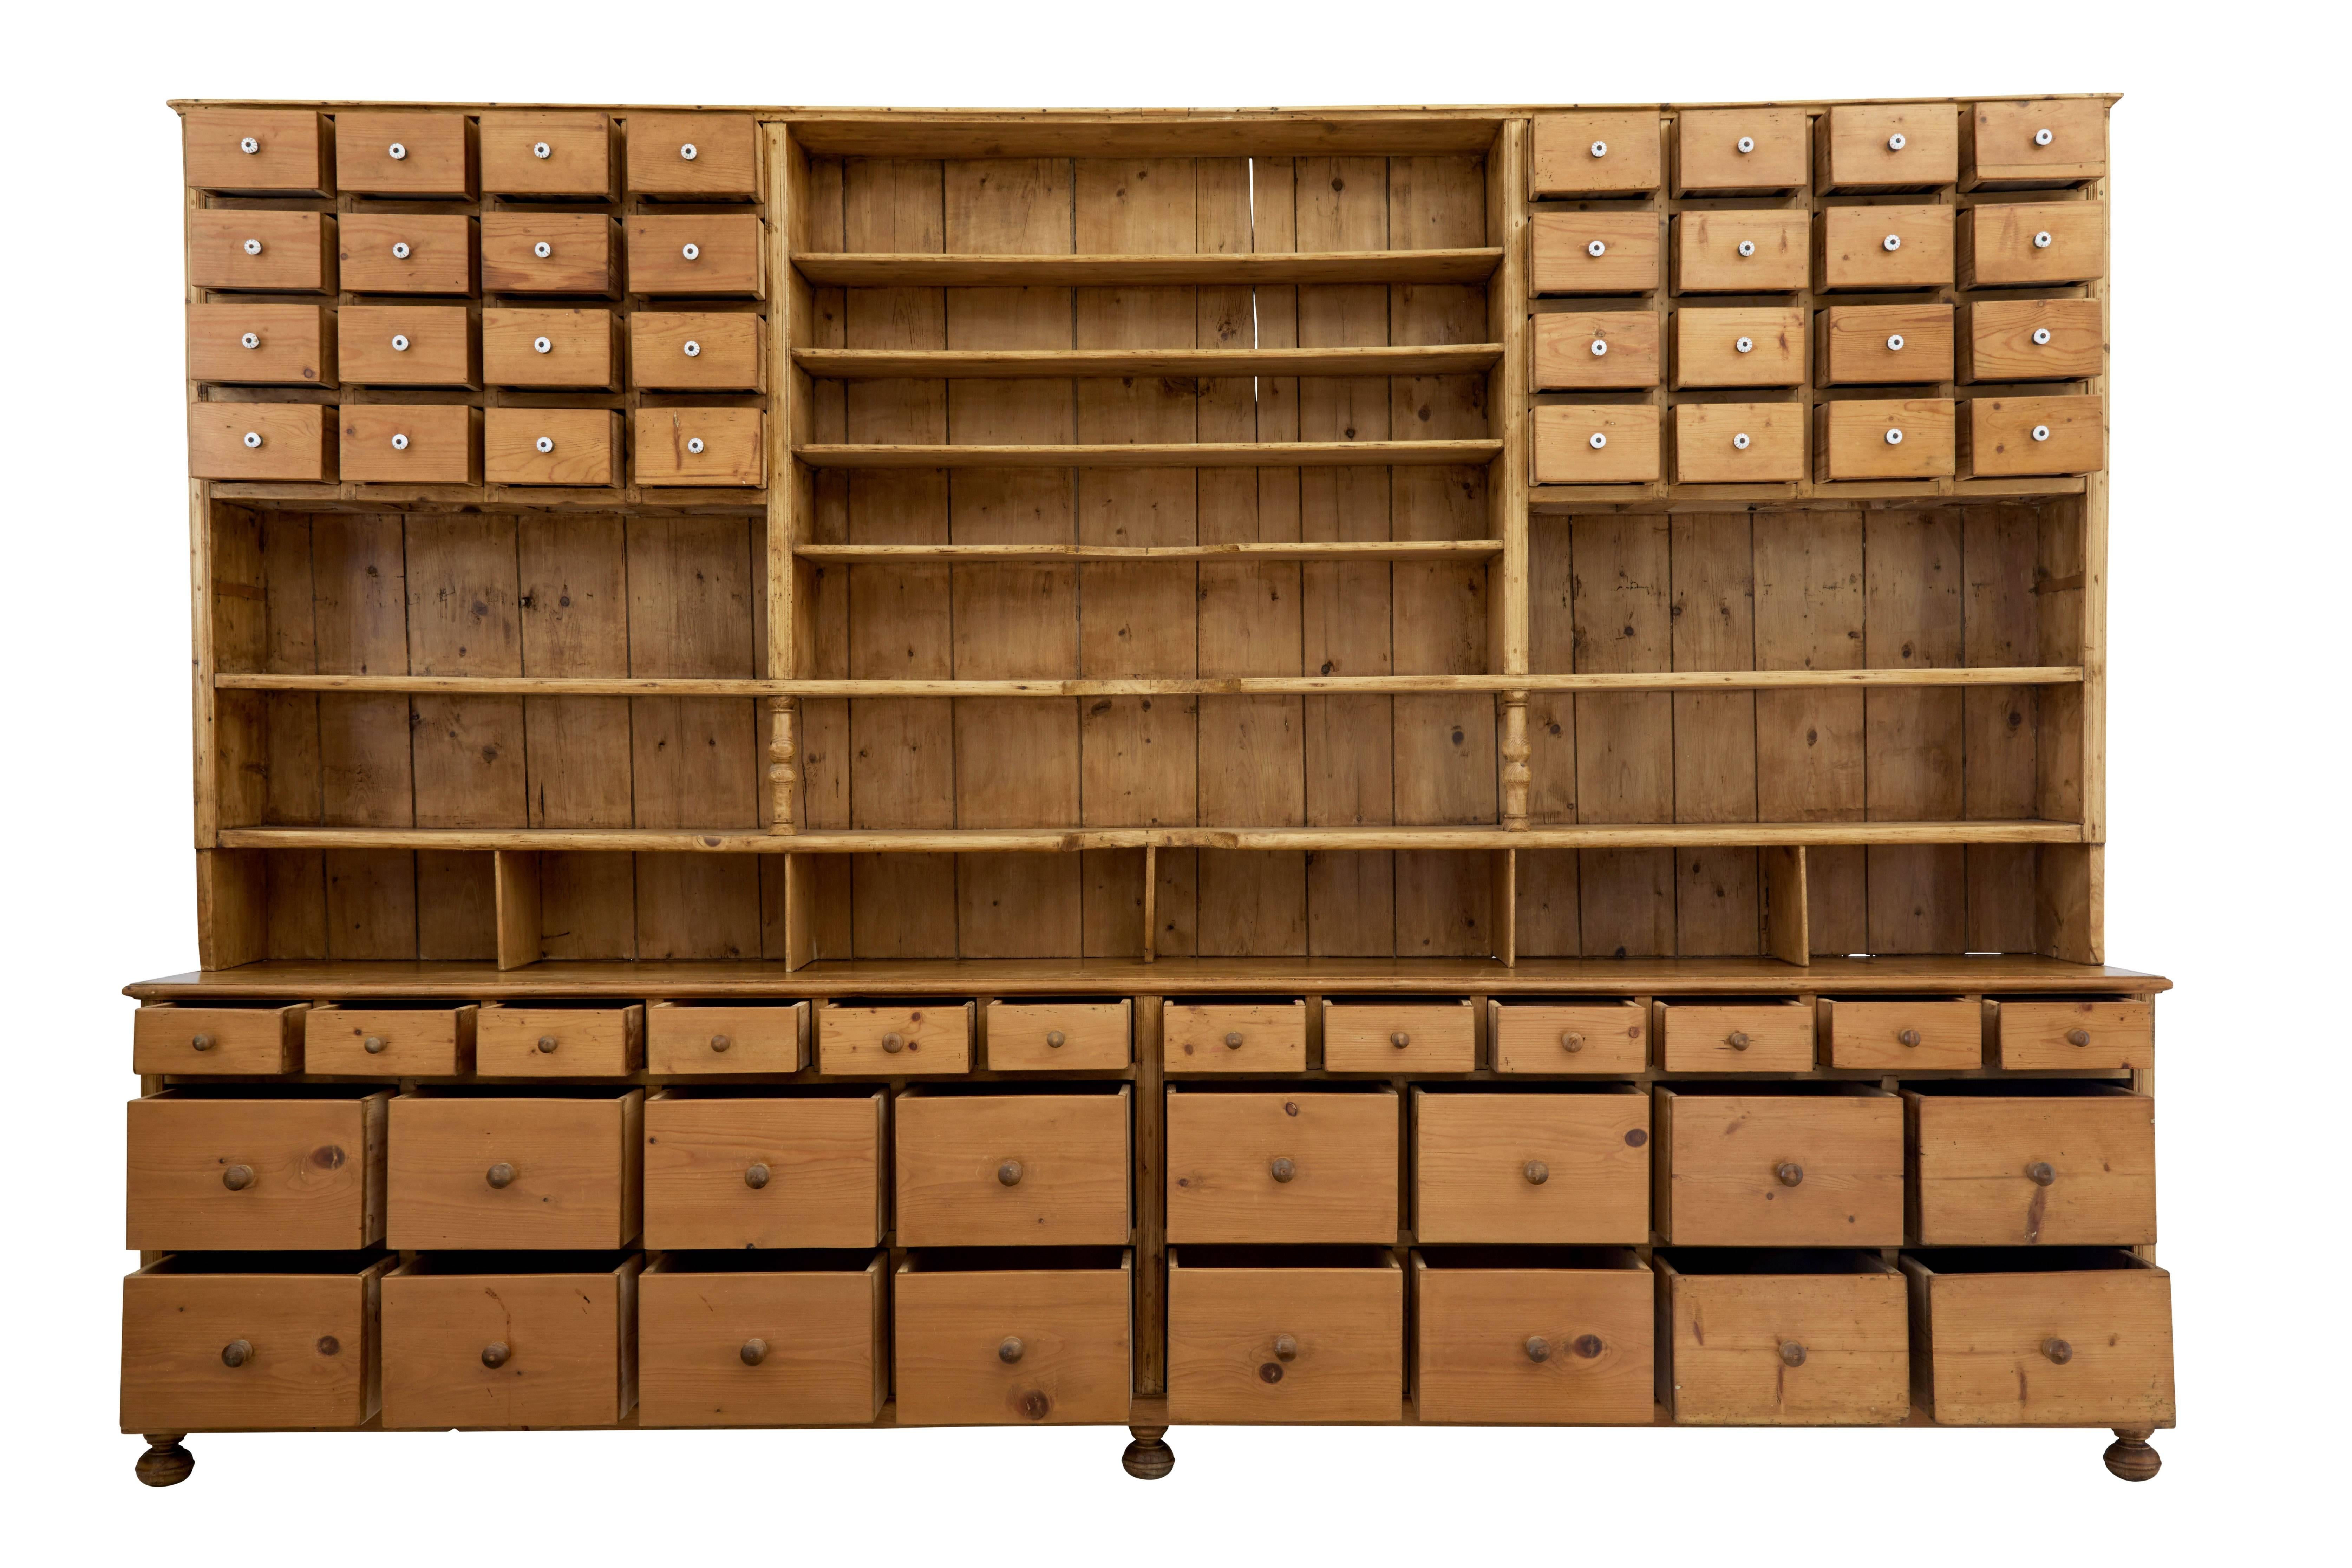 Two-part pine apothecary of large impressive proportions, circa 1880.
Bottom section of 16 large drawers with 12 smaller drawers above these. Top section with a central section of shelves, flanked either side by a bank of 16 drawers.
Wooden